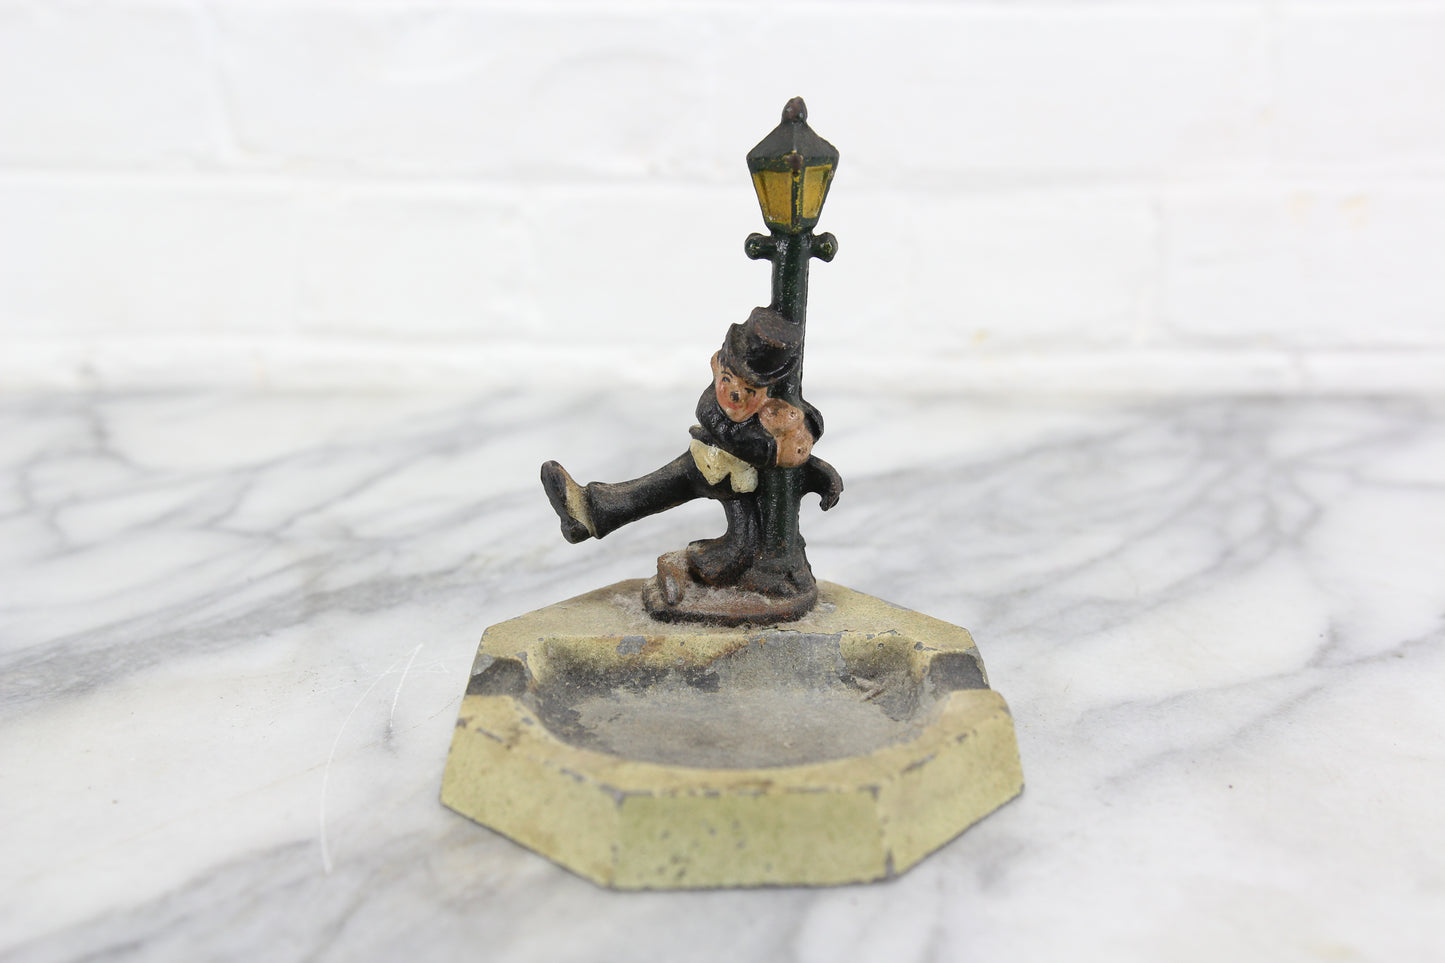 Die Cast Metal Ashtray with Drunk Man Hanging on Lamp Post, John Wright